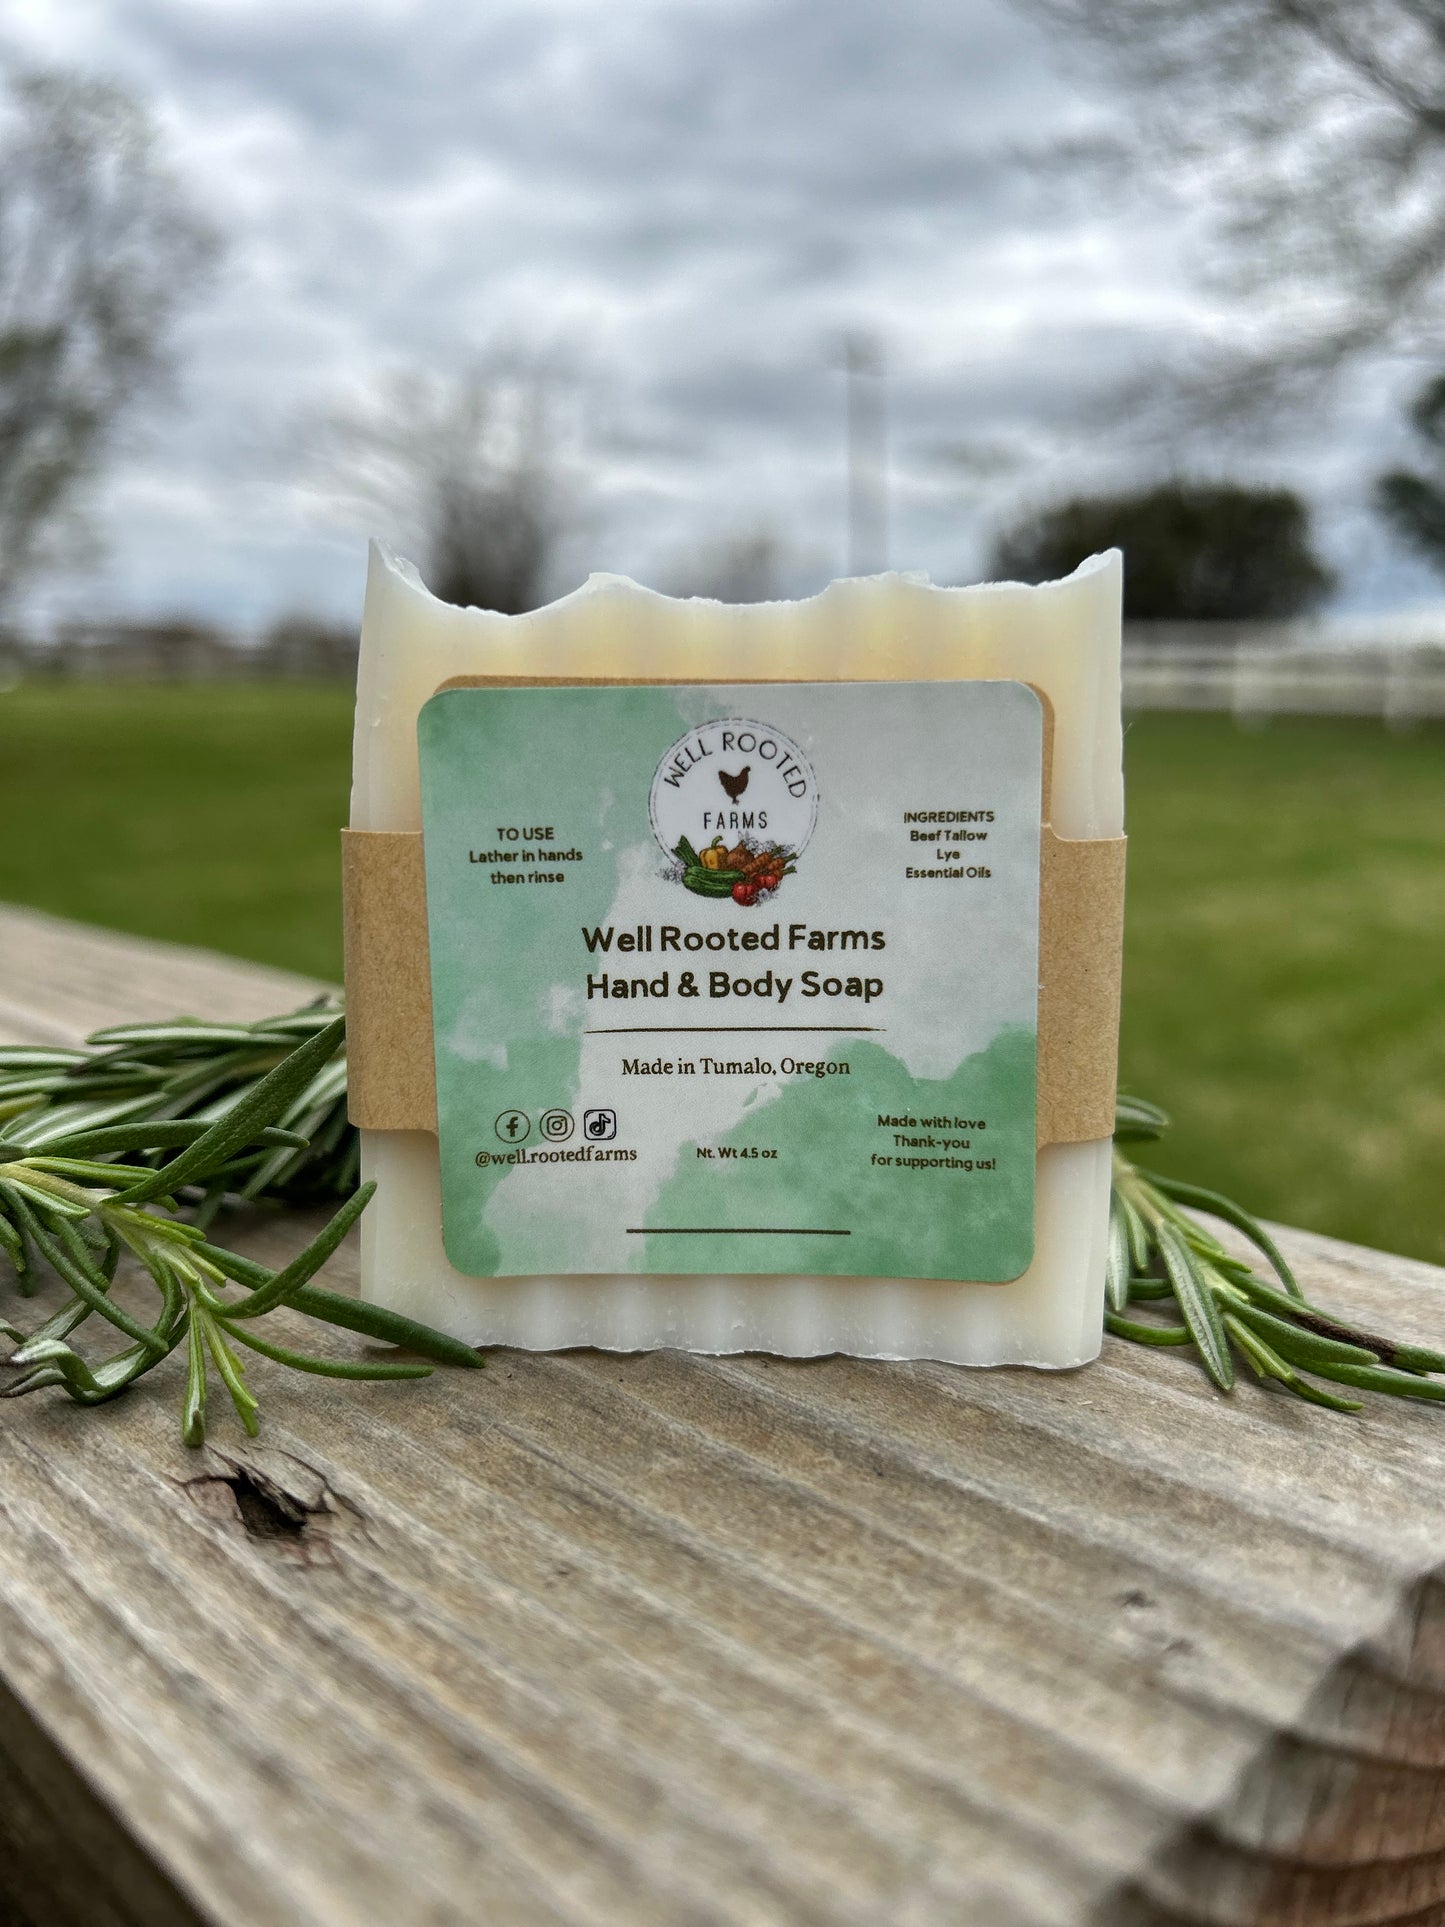 Well Rooted Farms' Soap Bar